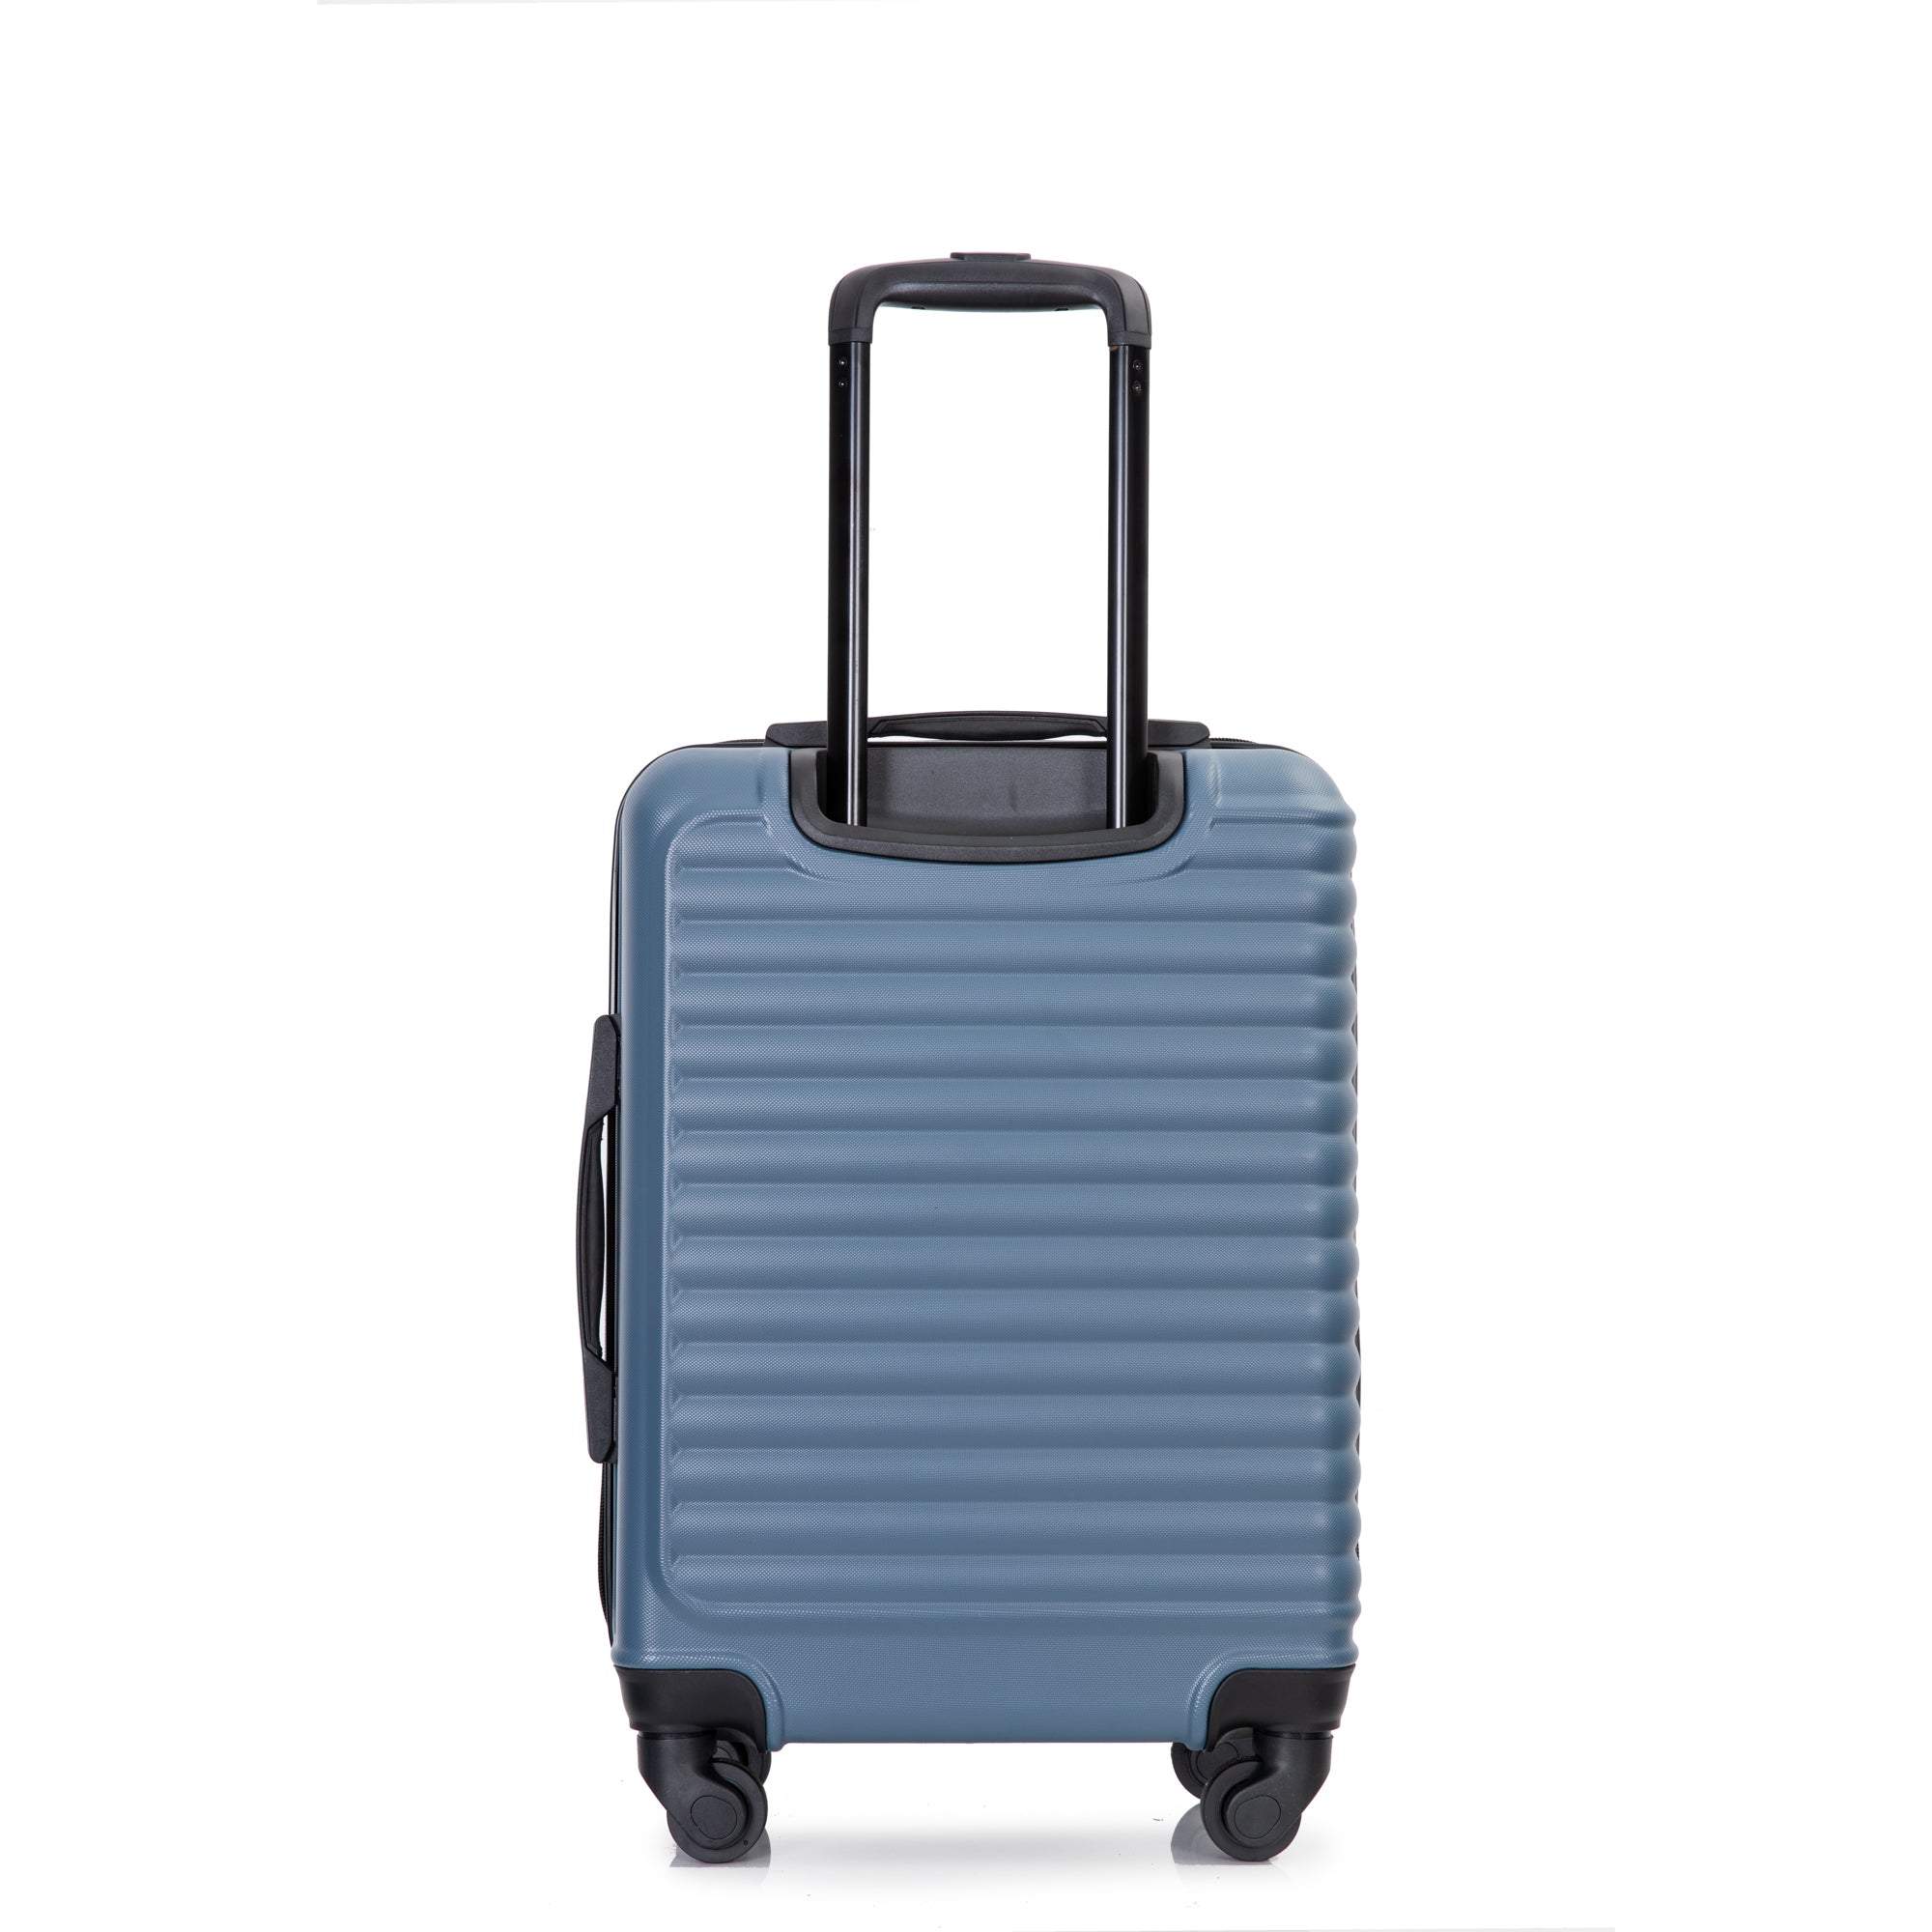 20" Carry on Luggage Lightweight Suitcase, Spinner blue-abs